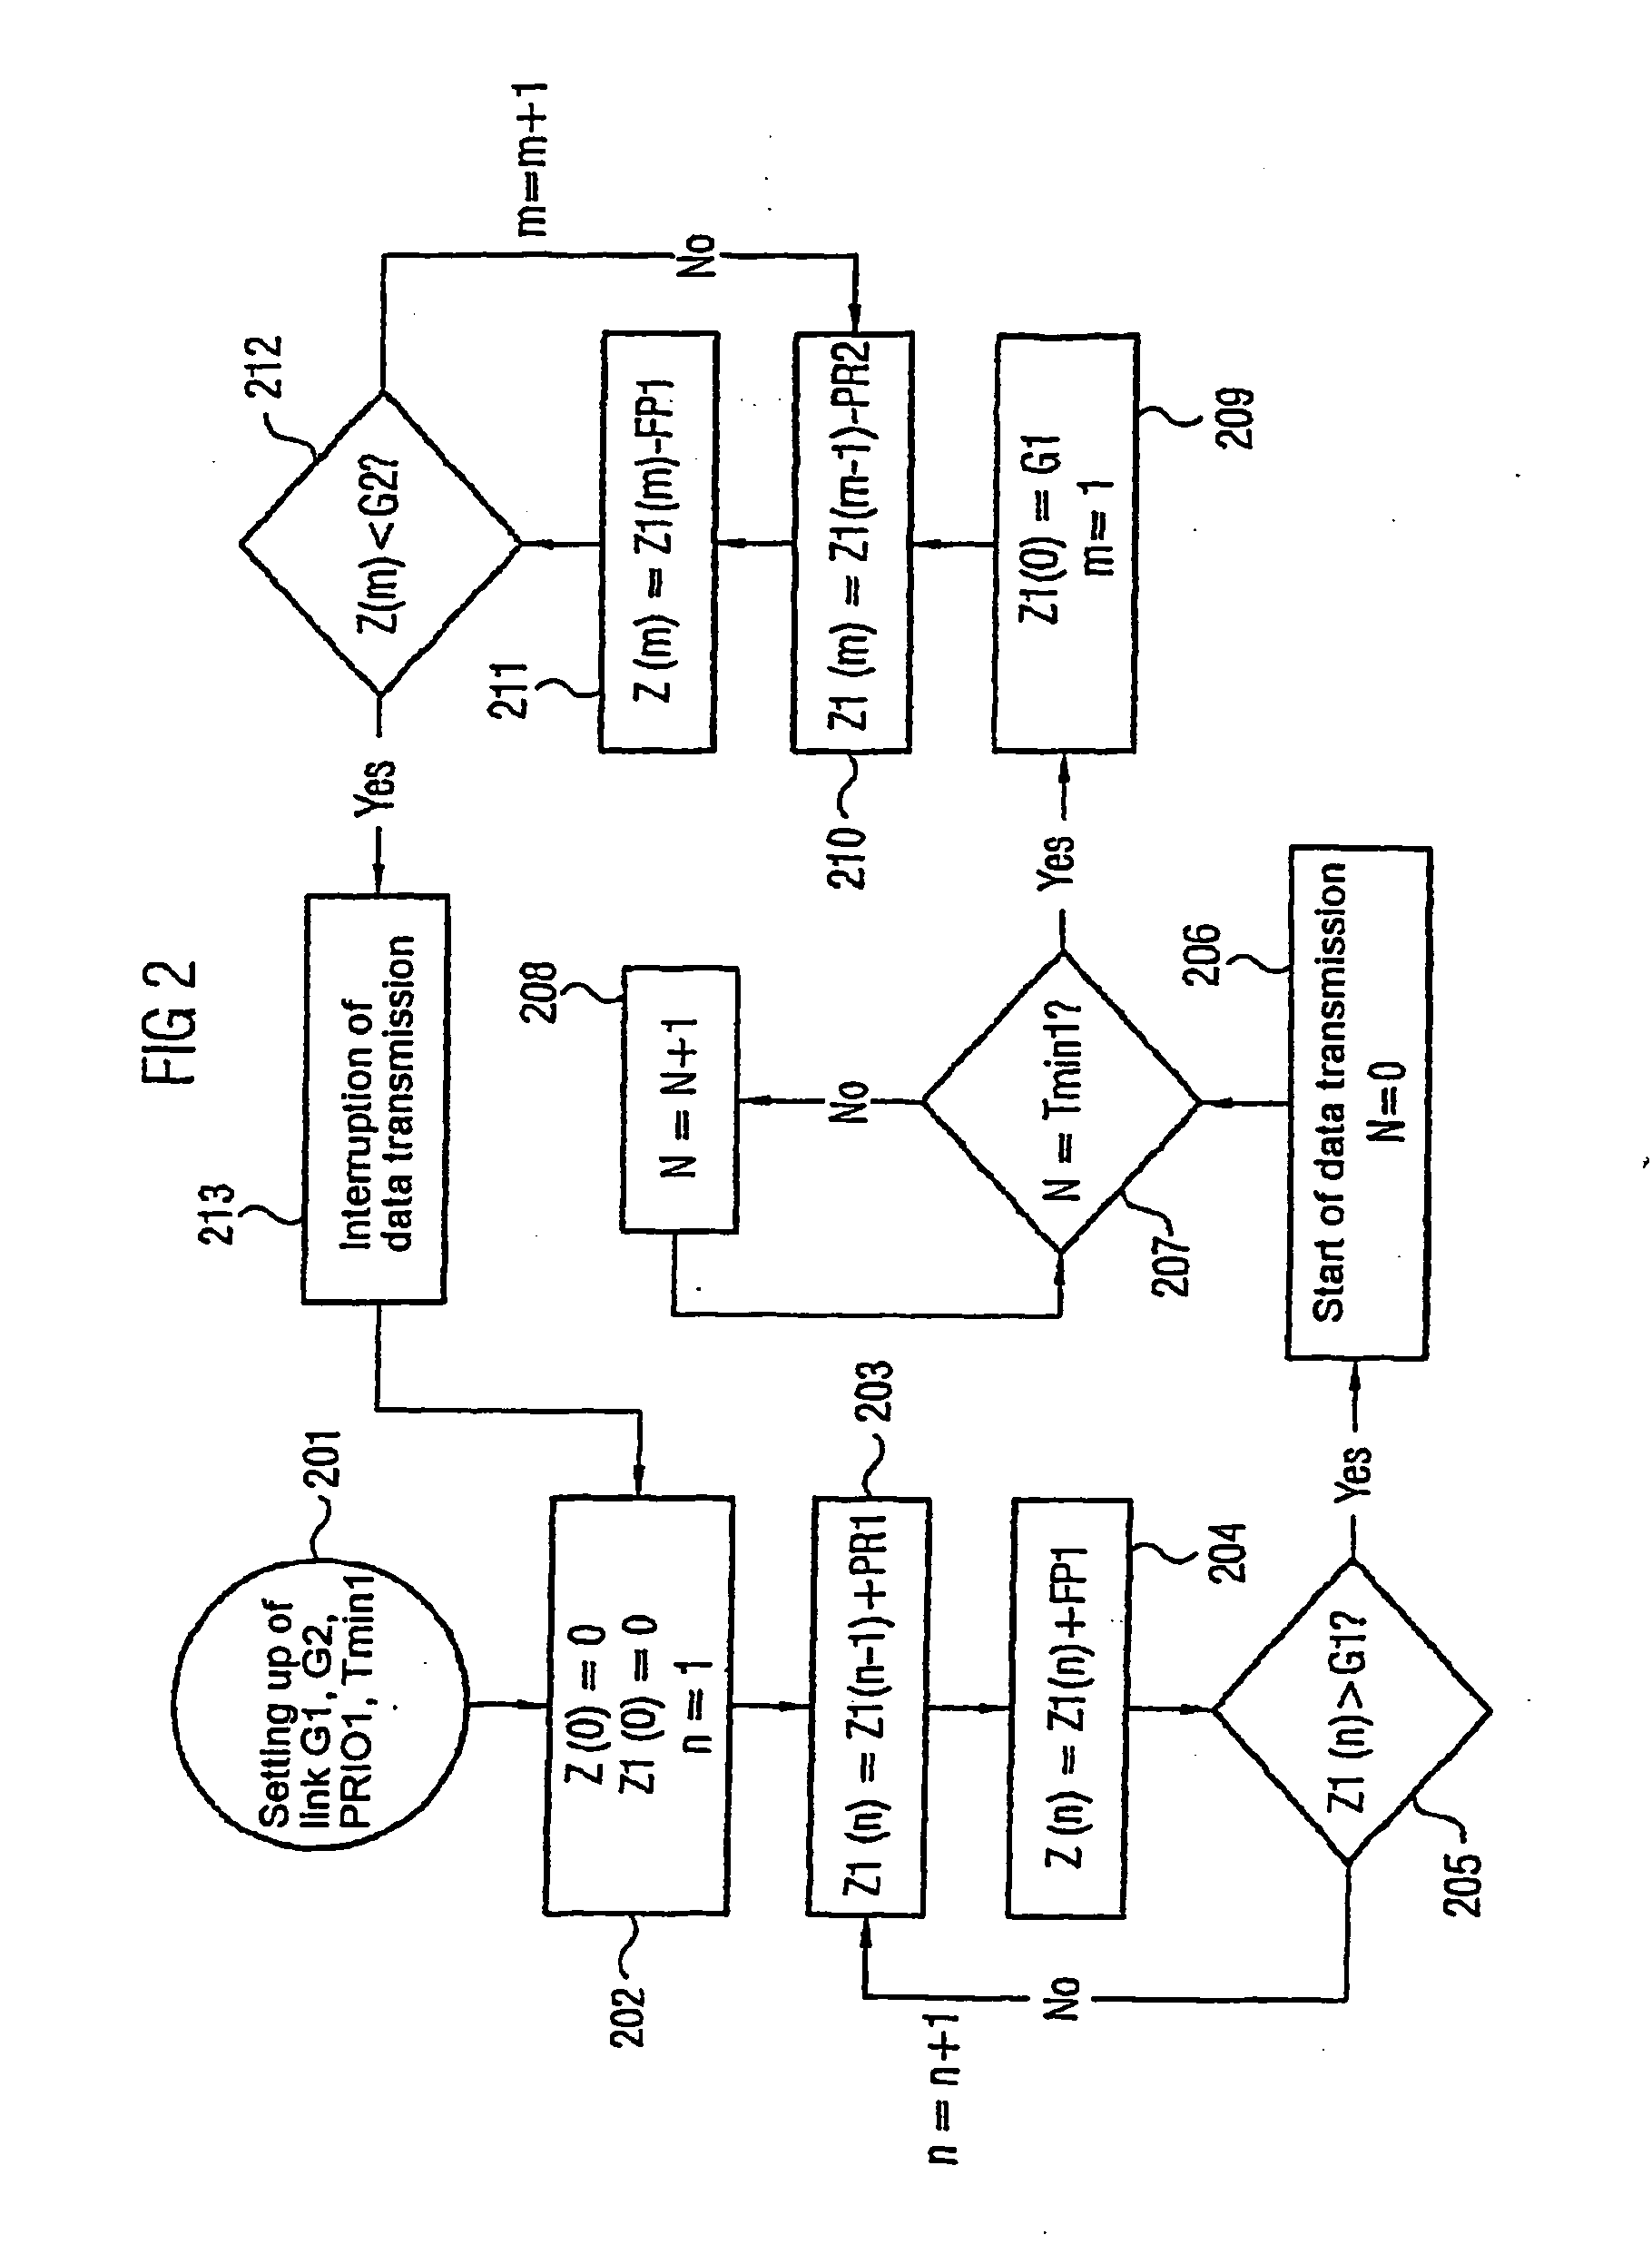 Method for transmitting data from a transmitting station to a receiving station via a radio link, and corresponding receiving station and transmitting station